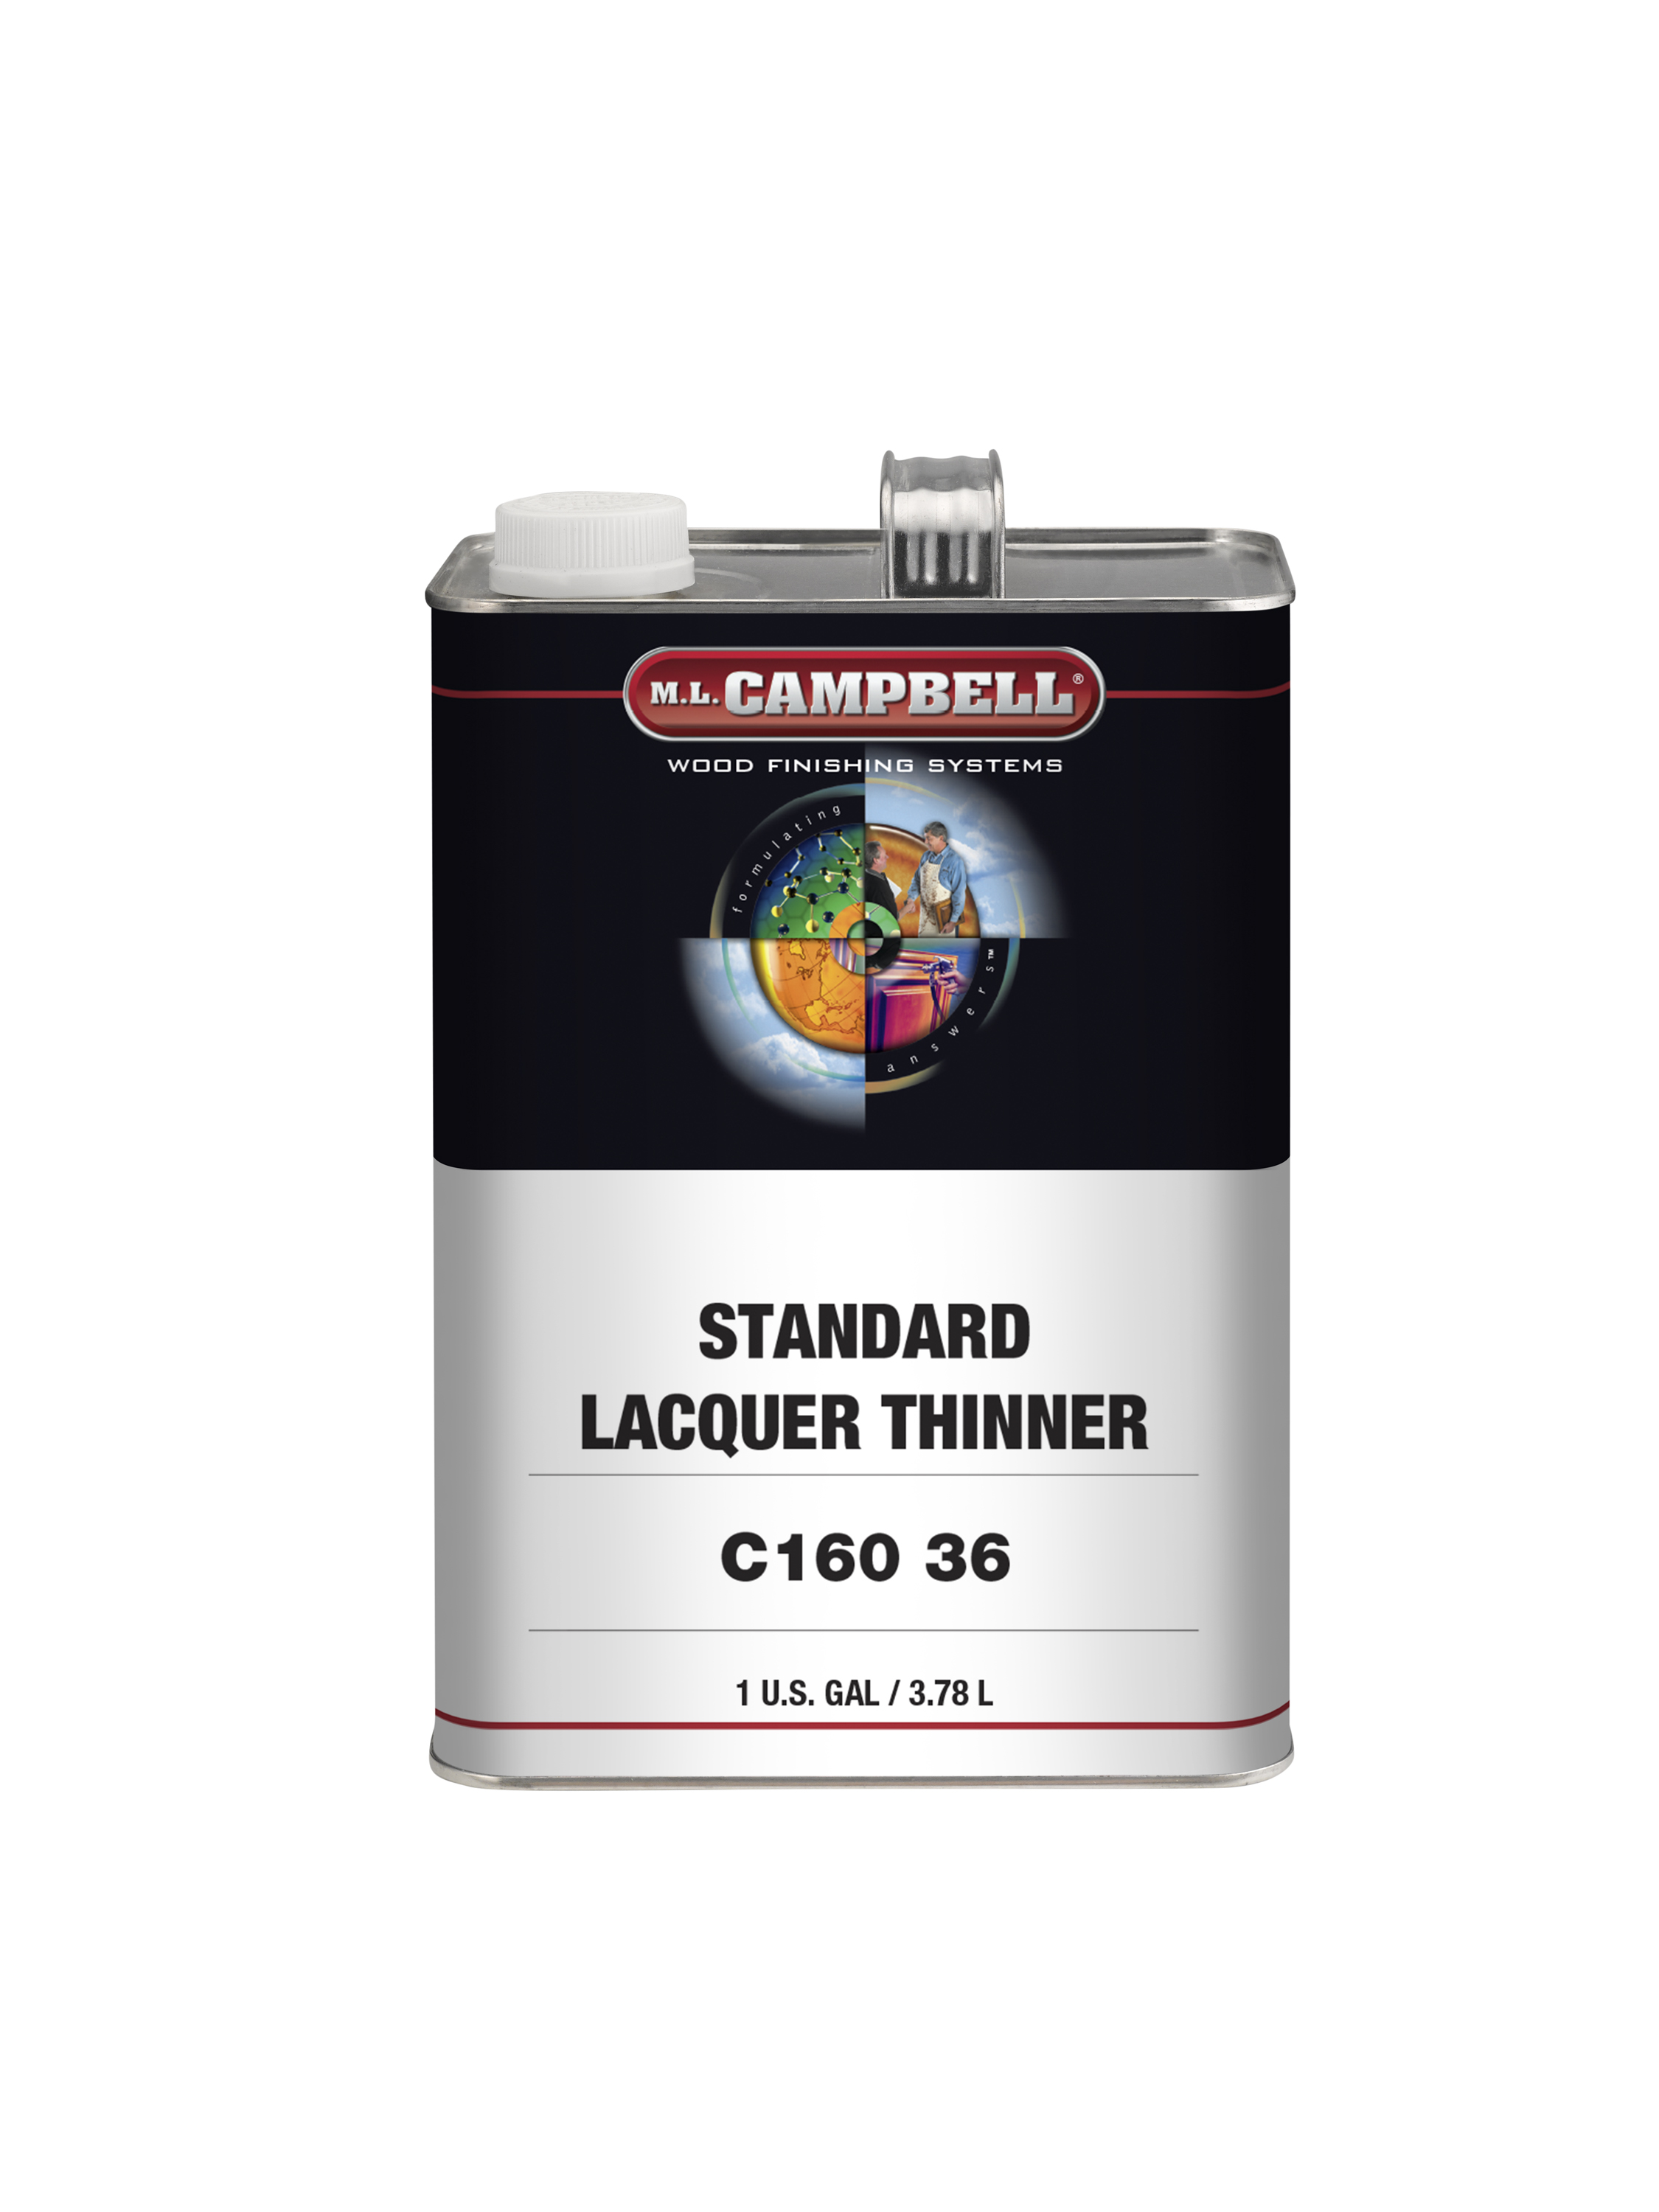 Quality Chemical Company - Lacquer Thinner